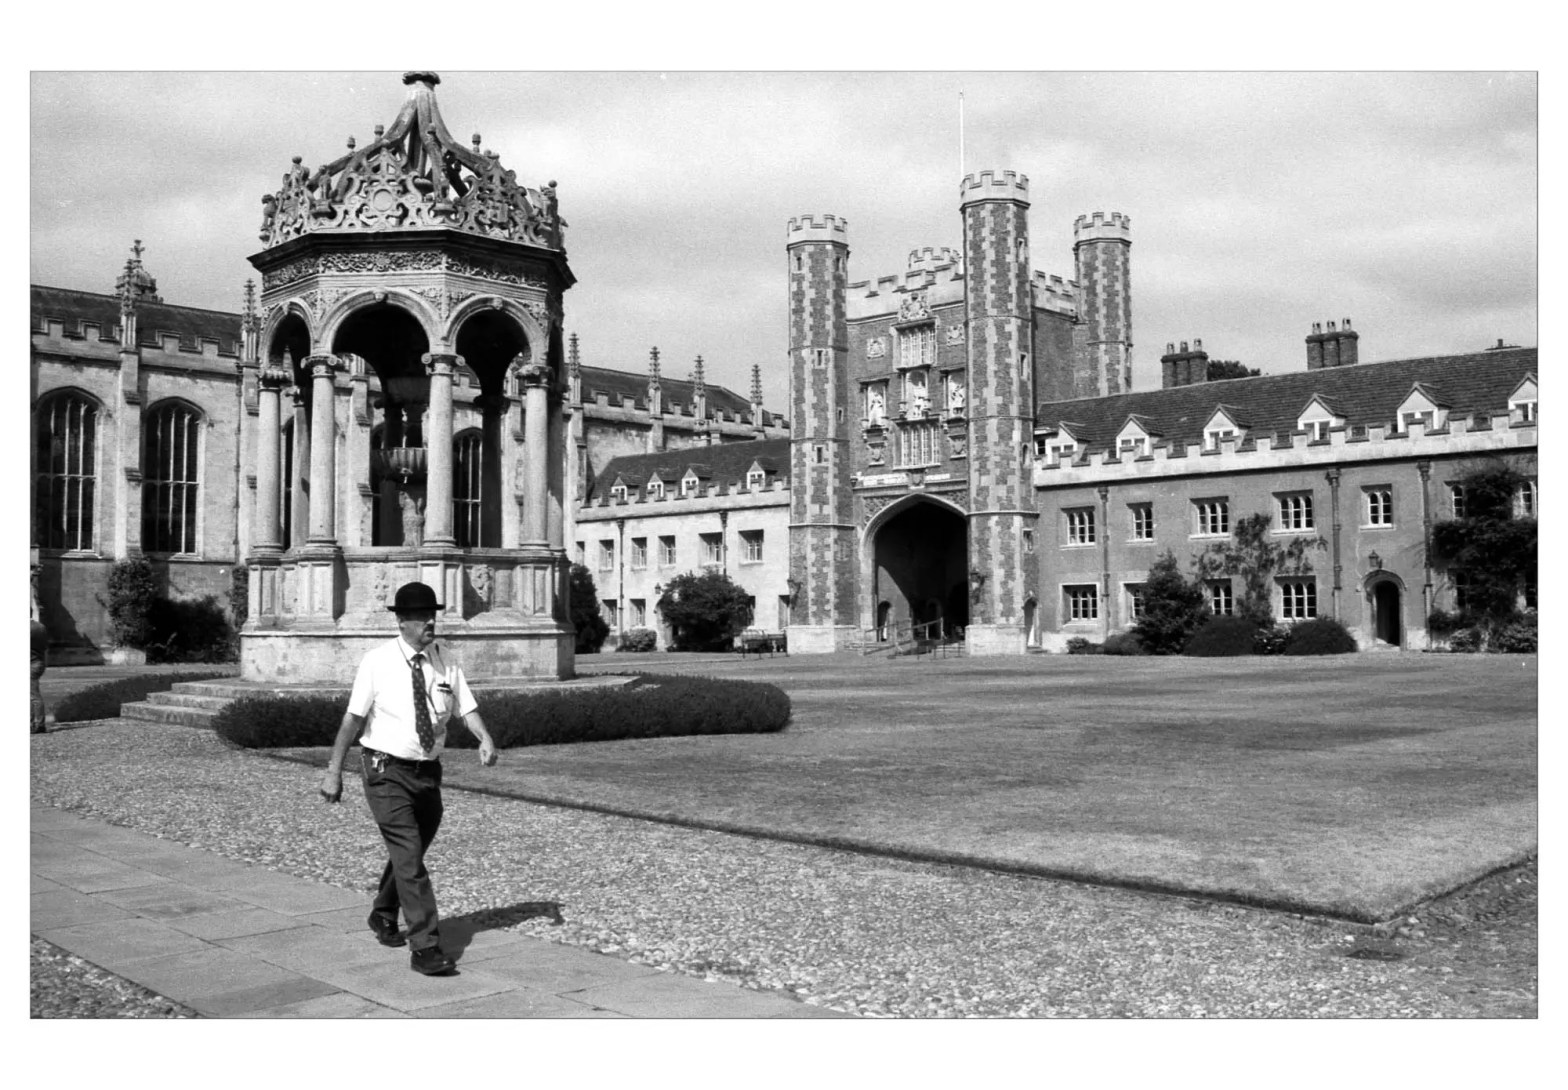 5 Frames… Of Cambridge with Kentmere 100 (EI 100 / 35mm format / Olympus OM-10)